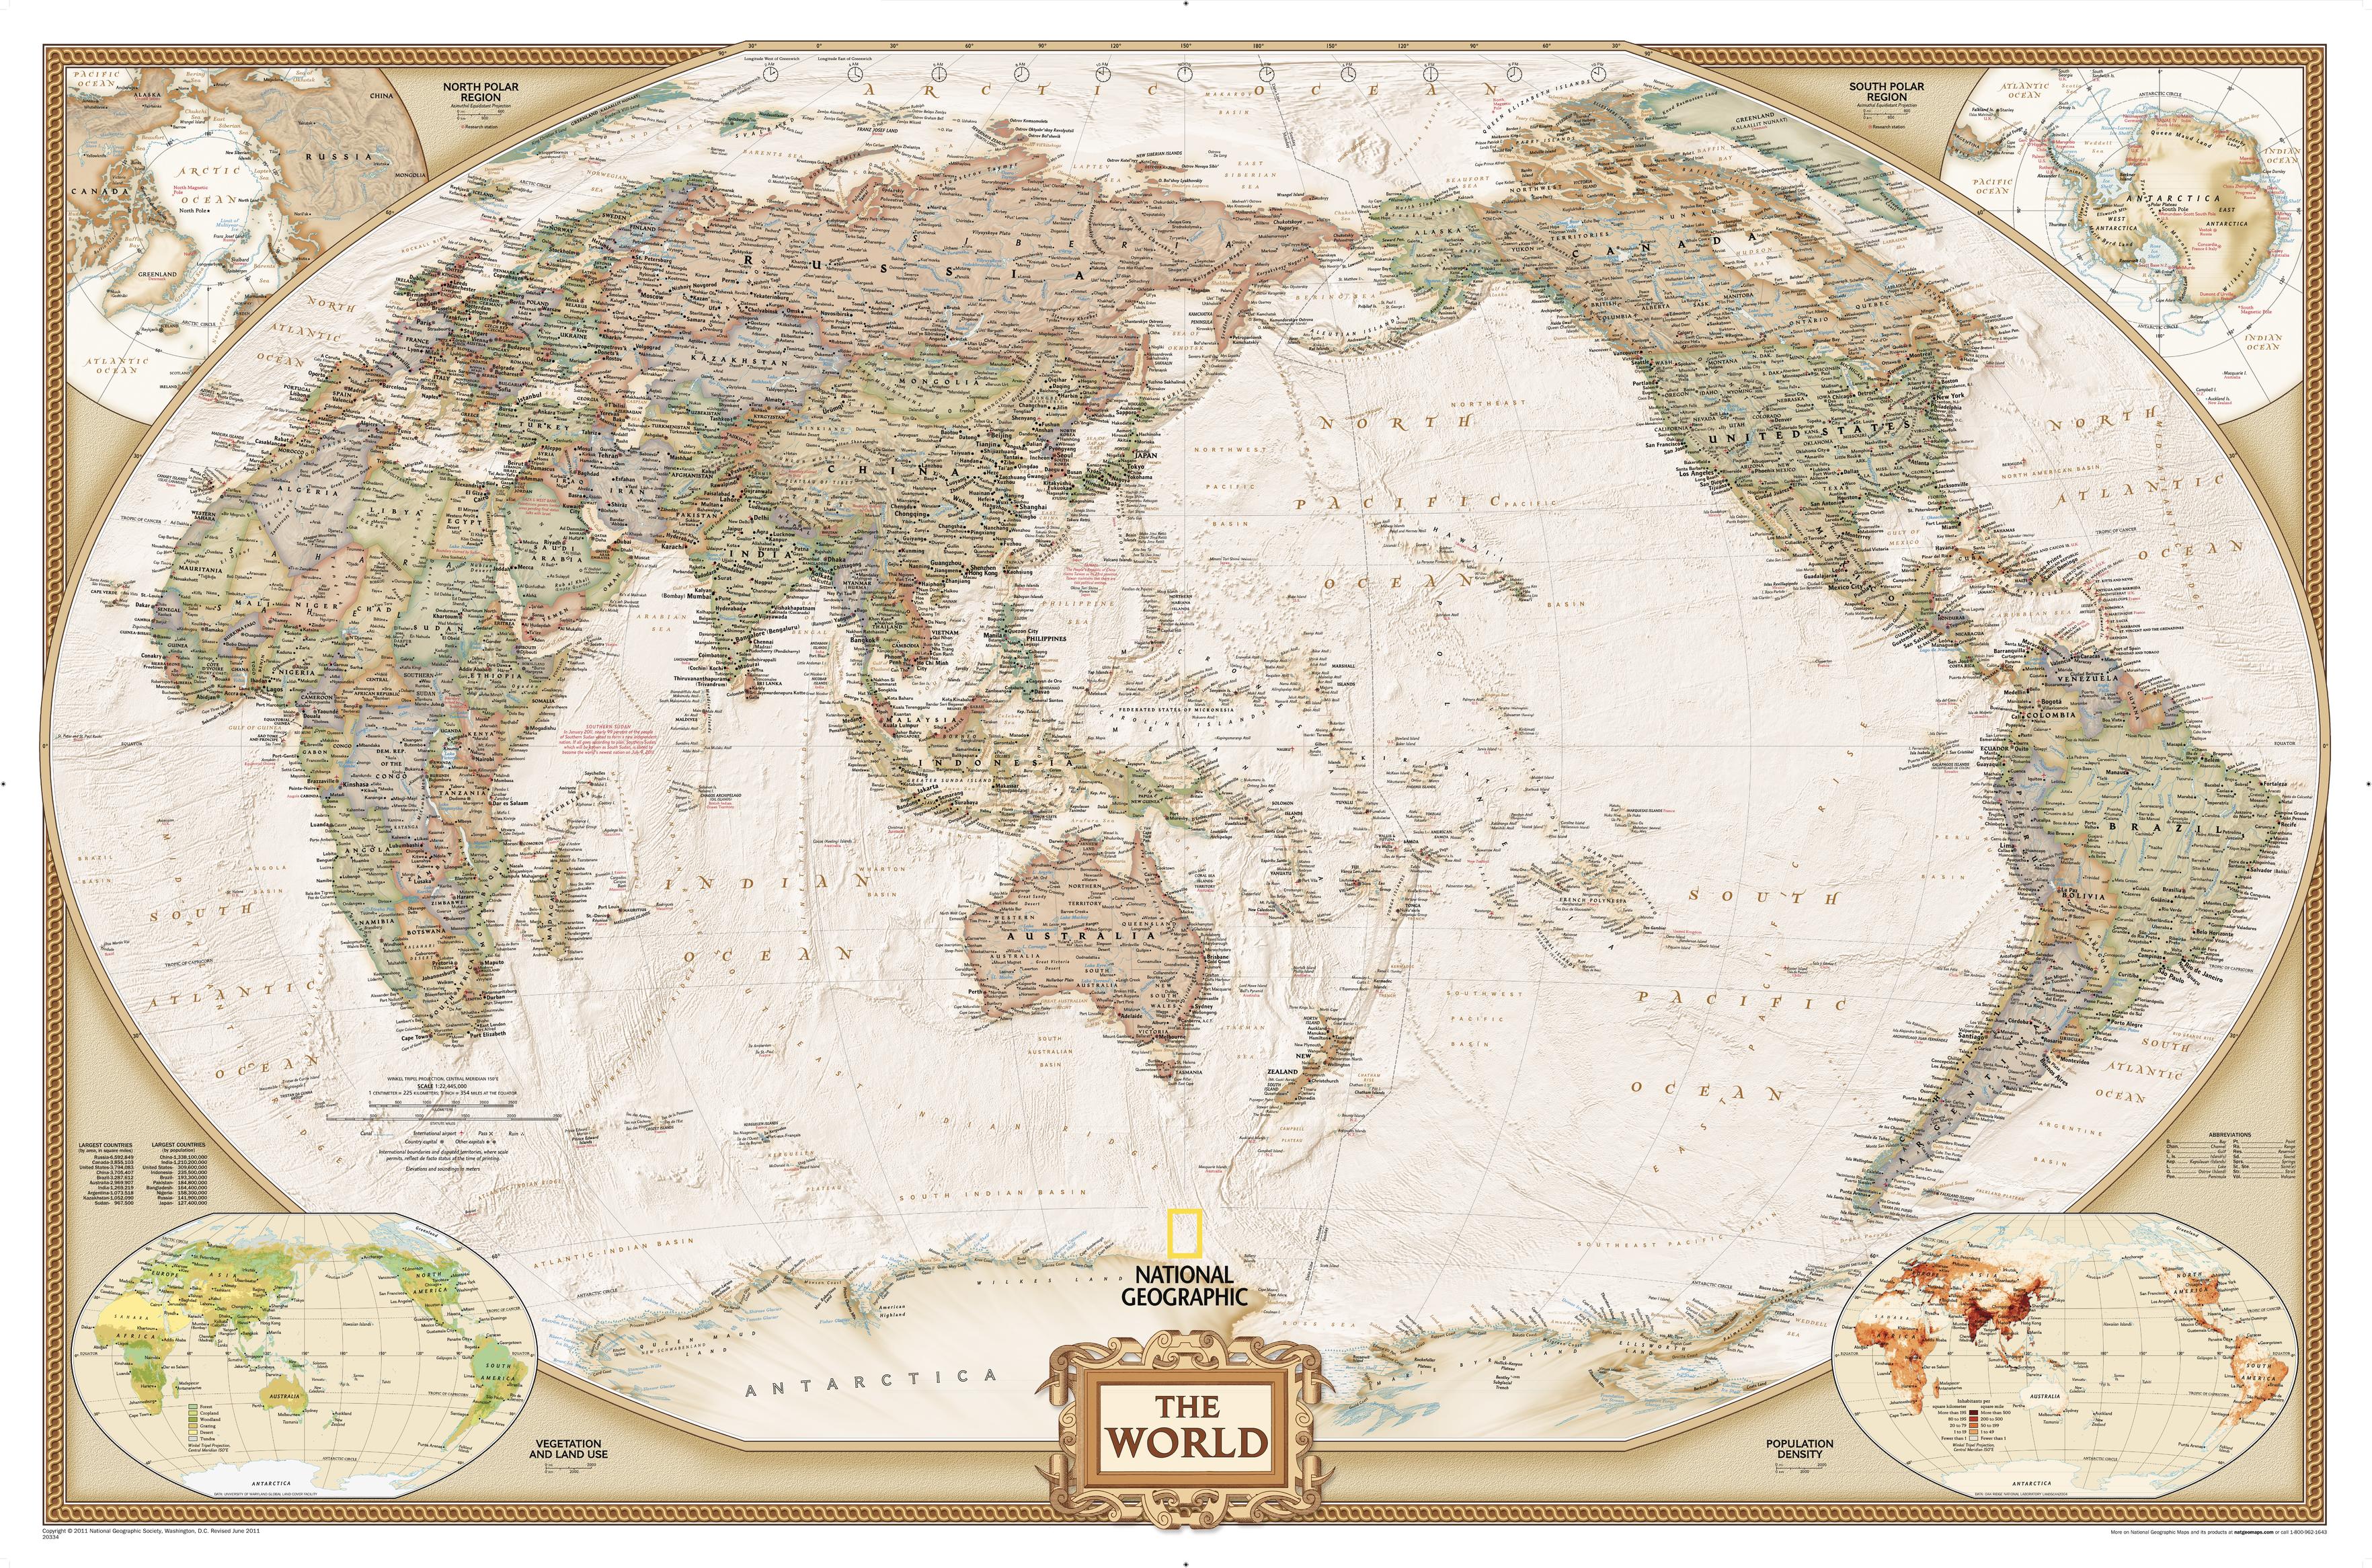 World Executive Pacific Centred Large Wall Map by National Geographic (2015)